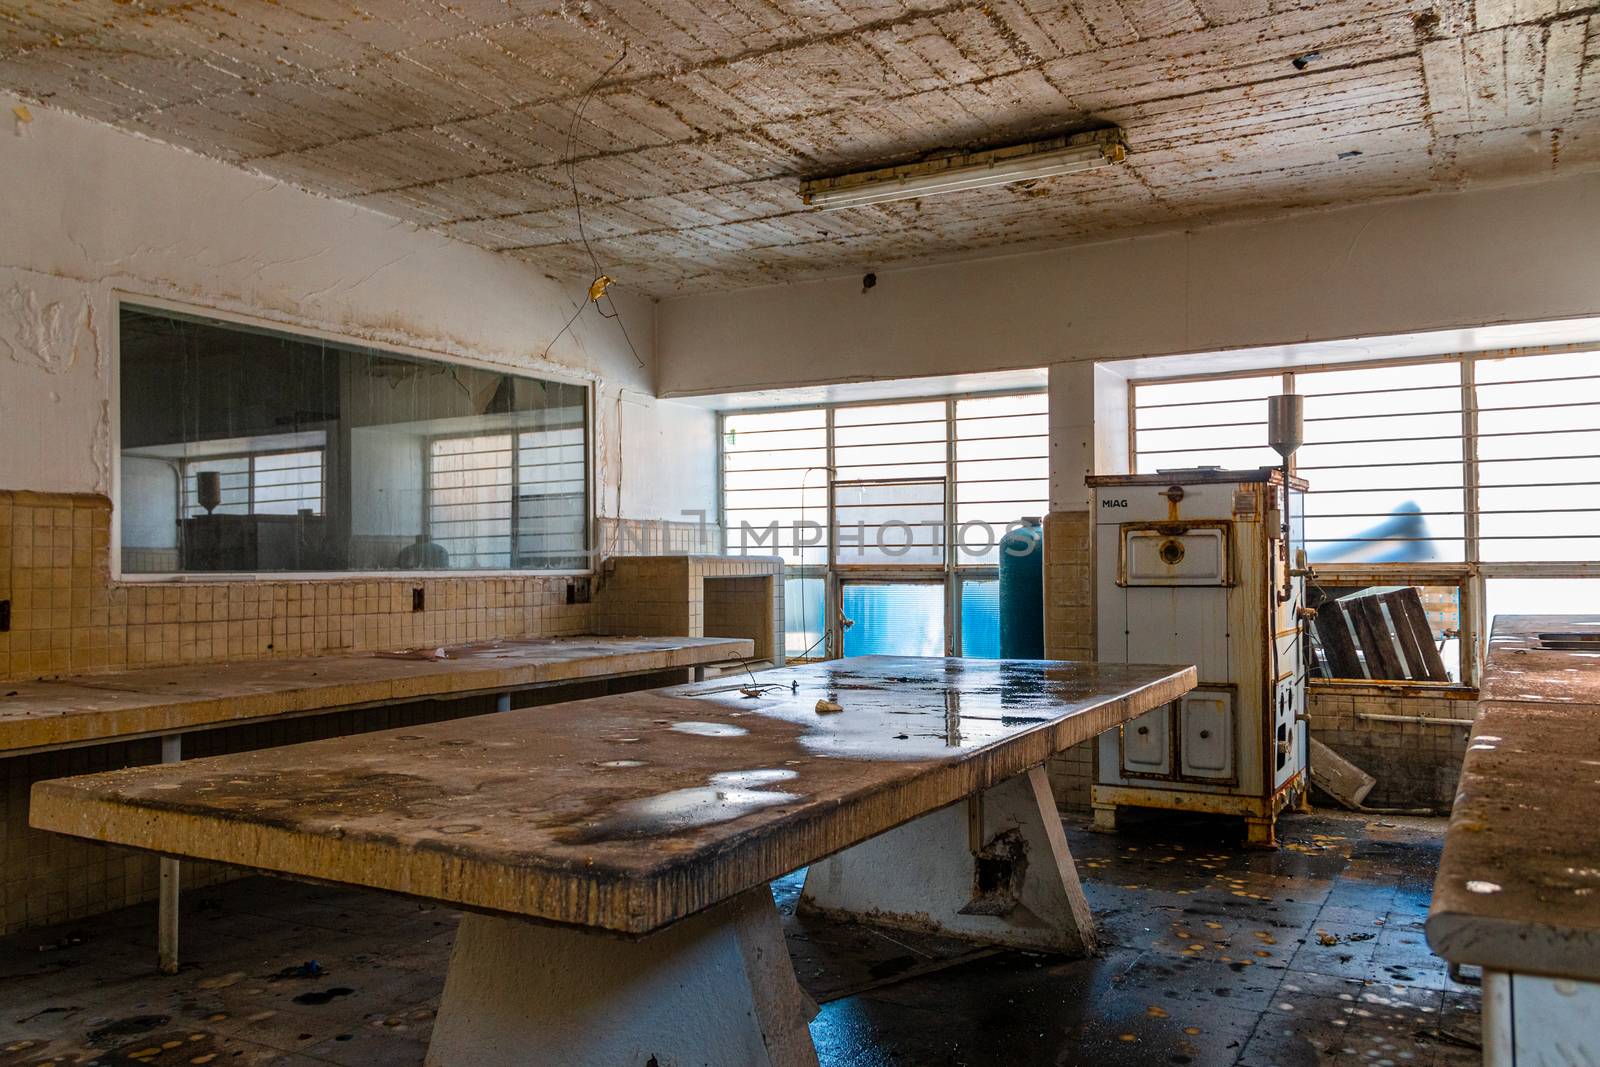 Chemistry laboratory in abandoned school with examination table in the center. backlighting